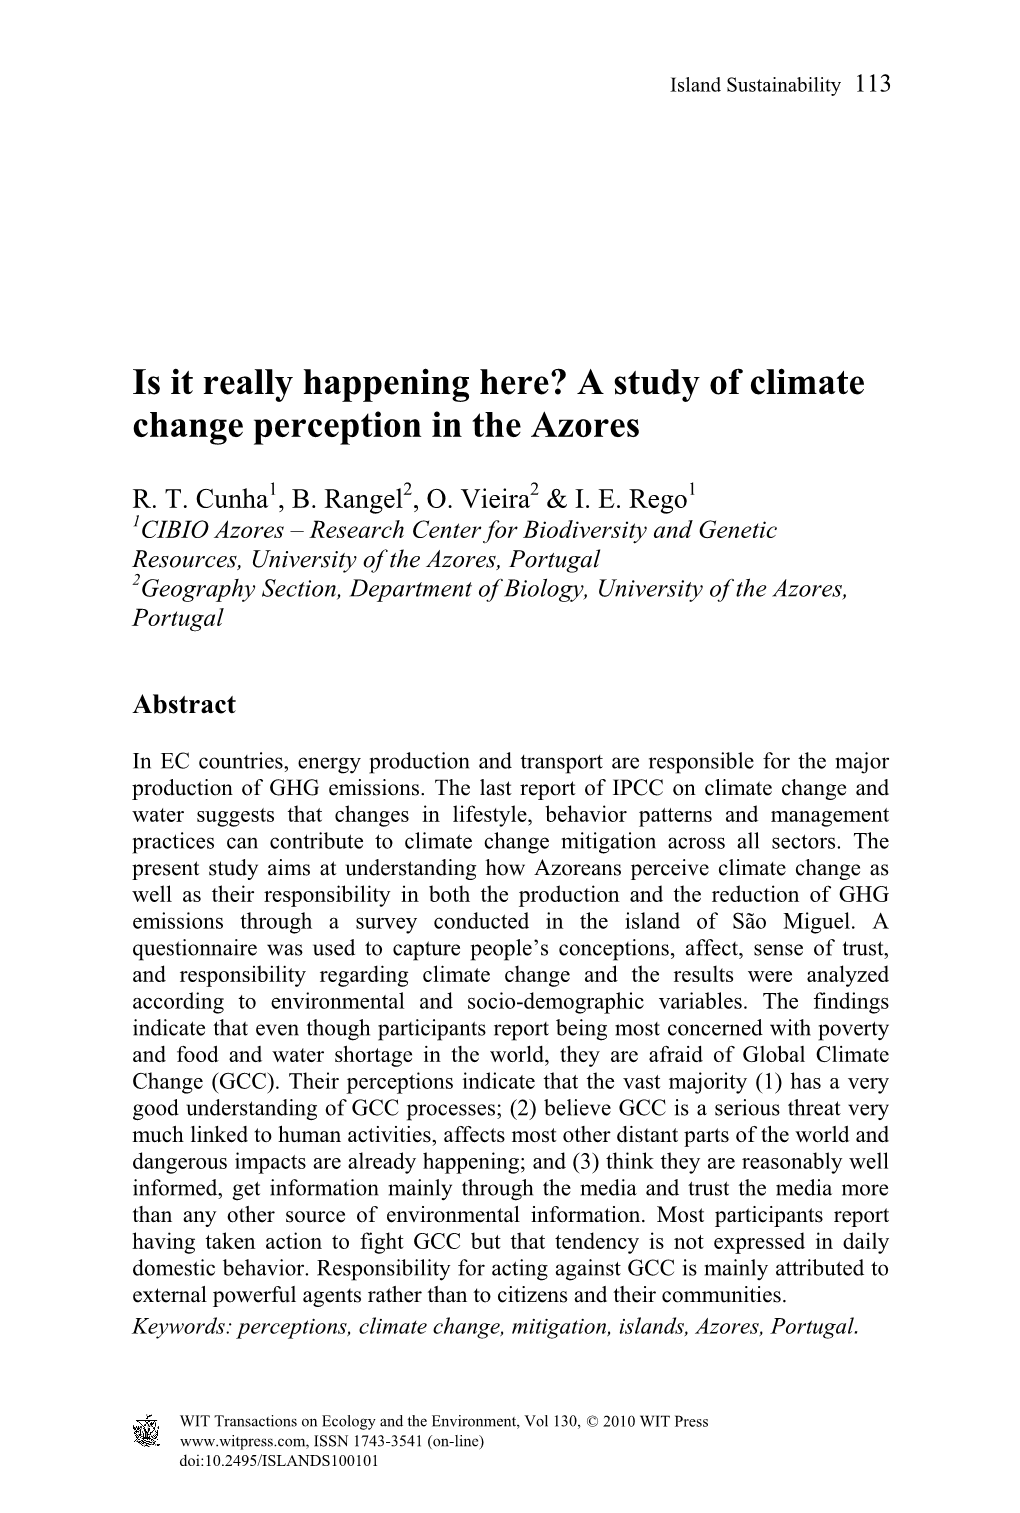 A Study of Climate Change Perception in the Azores